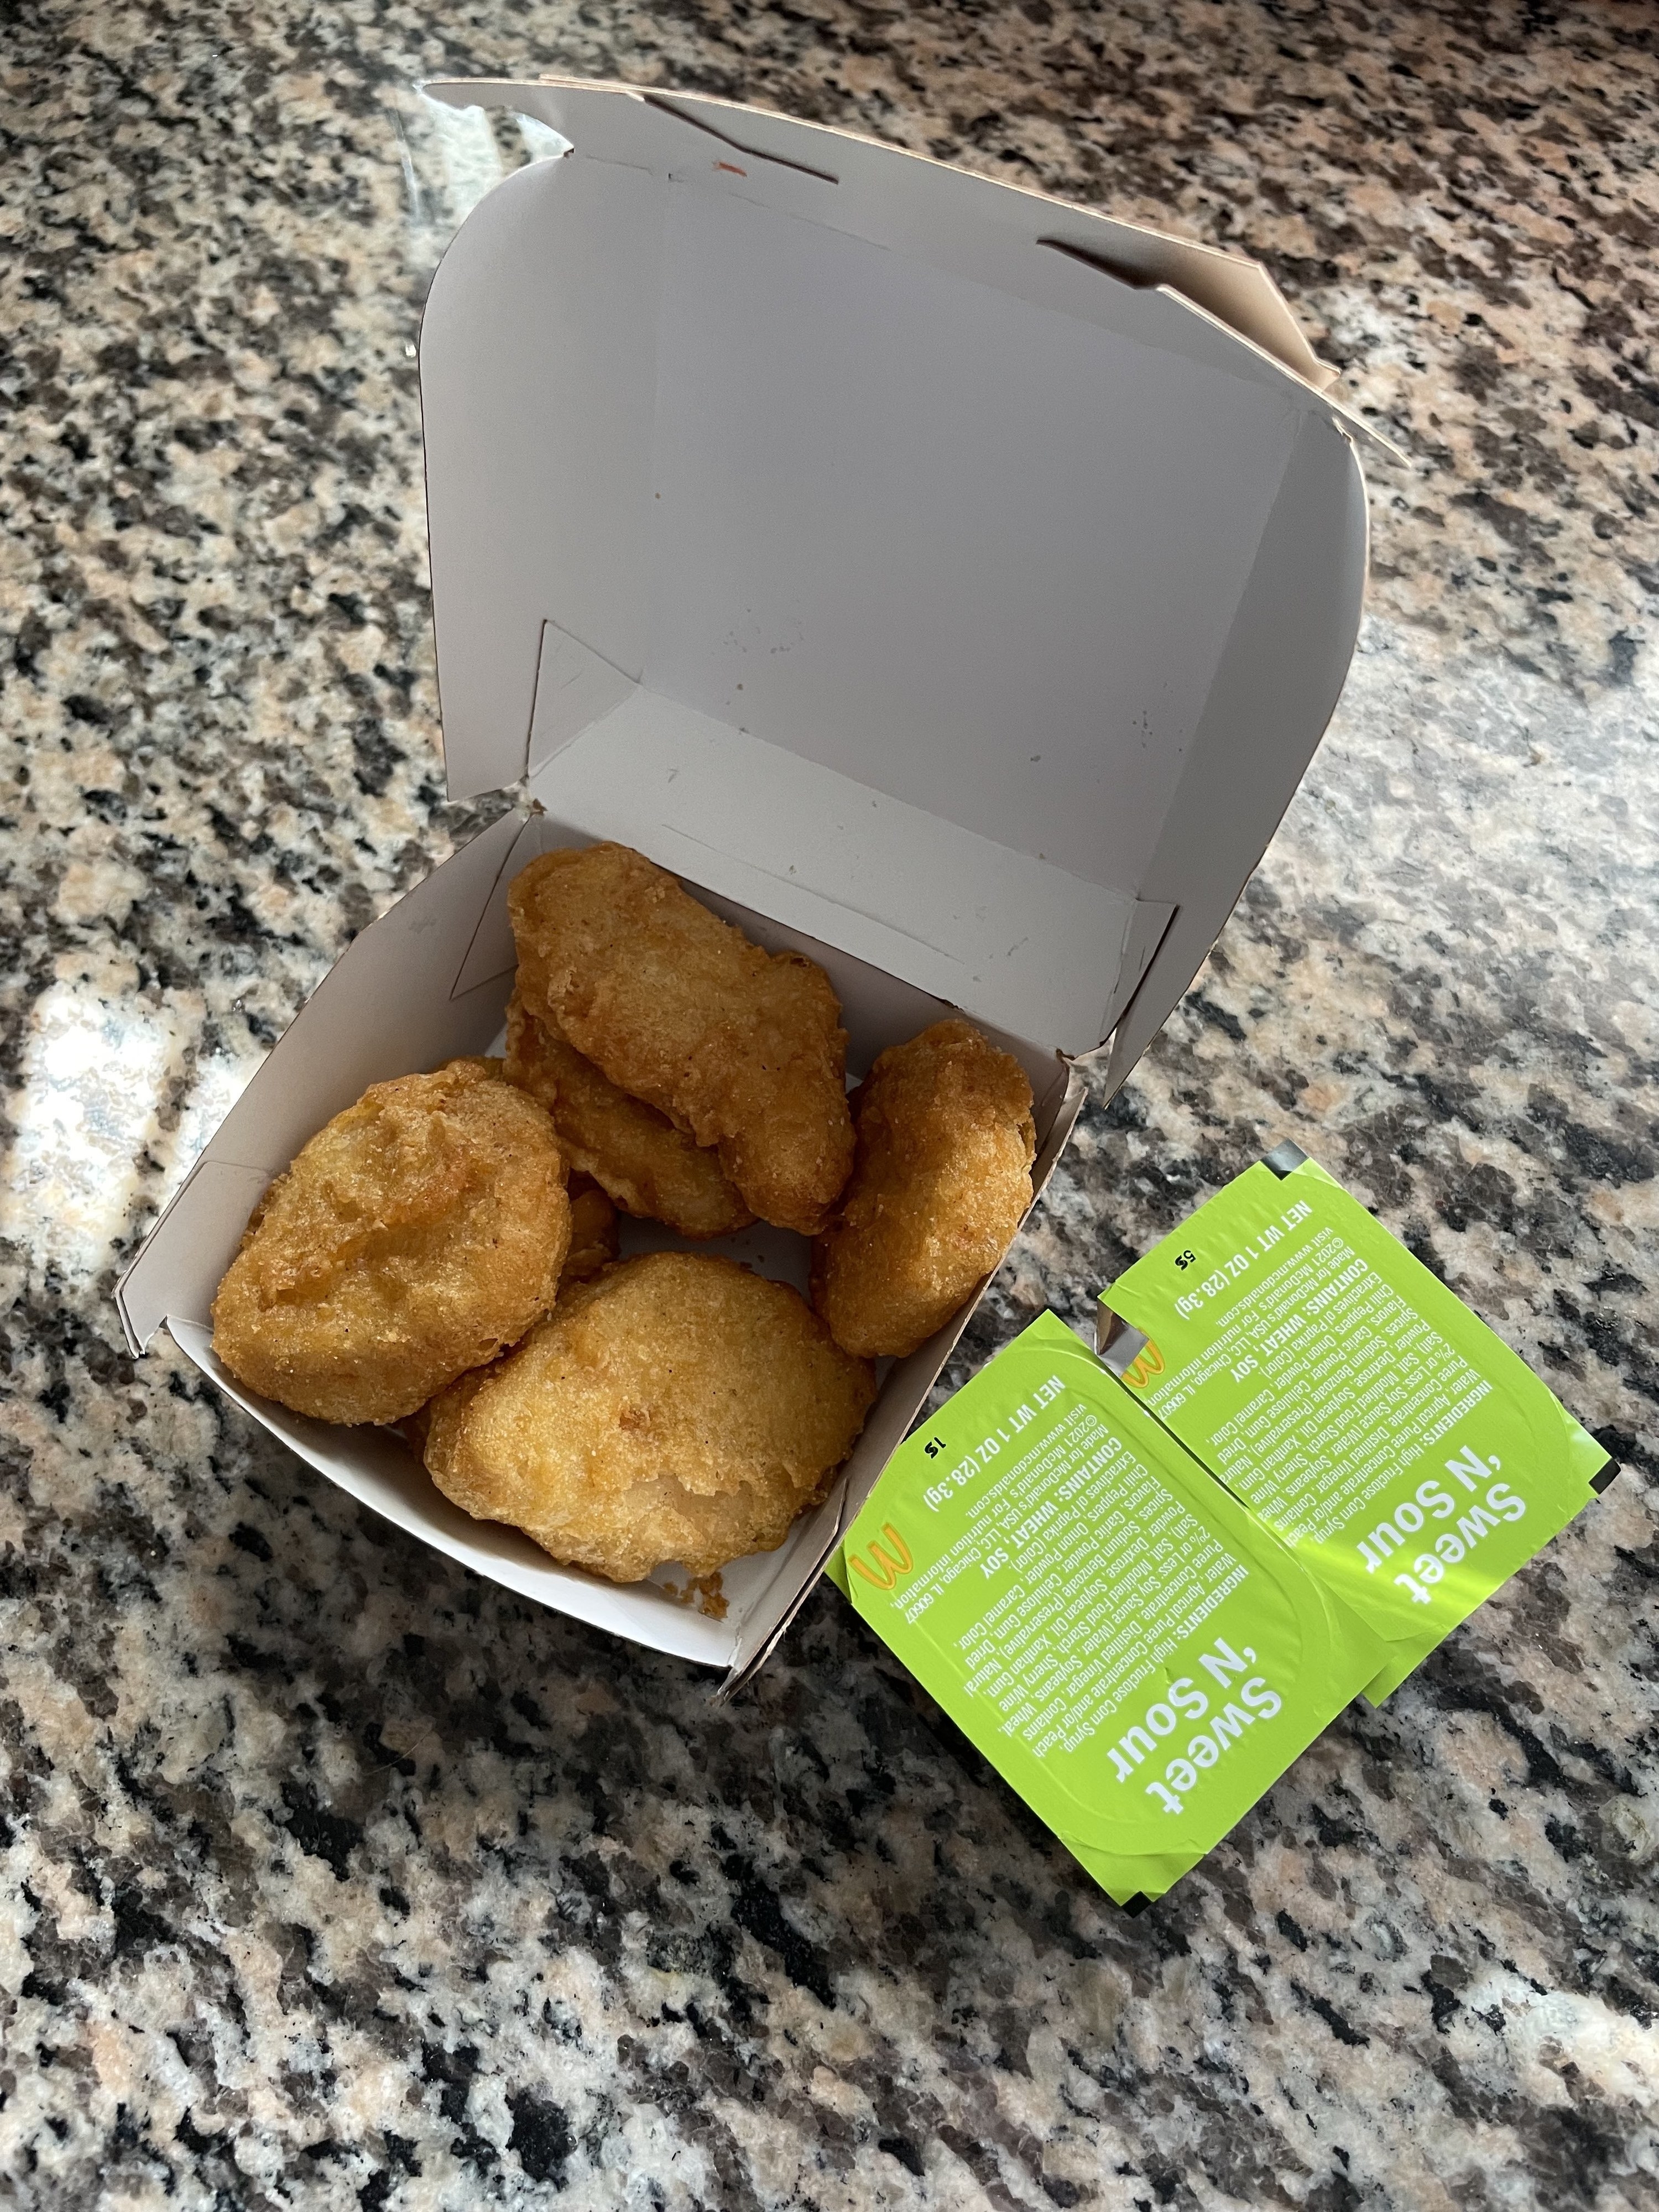 The nuggets in a takeout box with sweet &#x27;n sour sauce packets